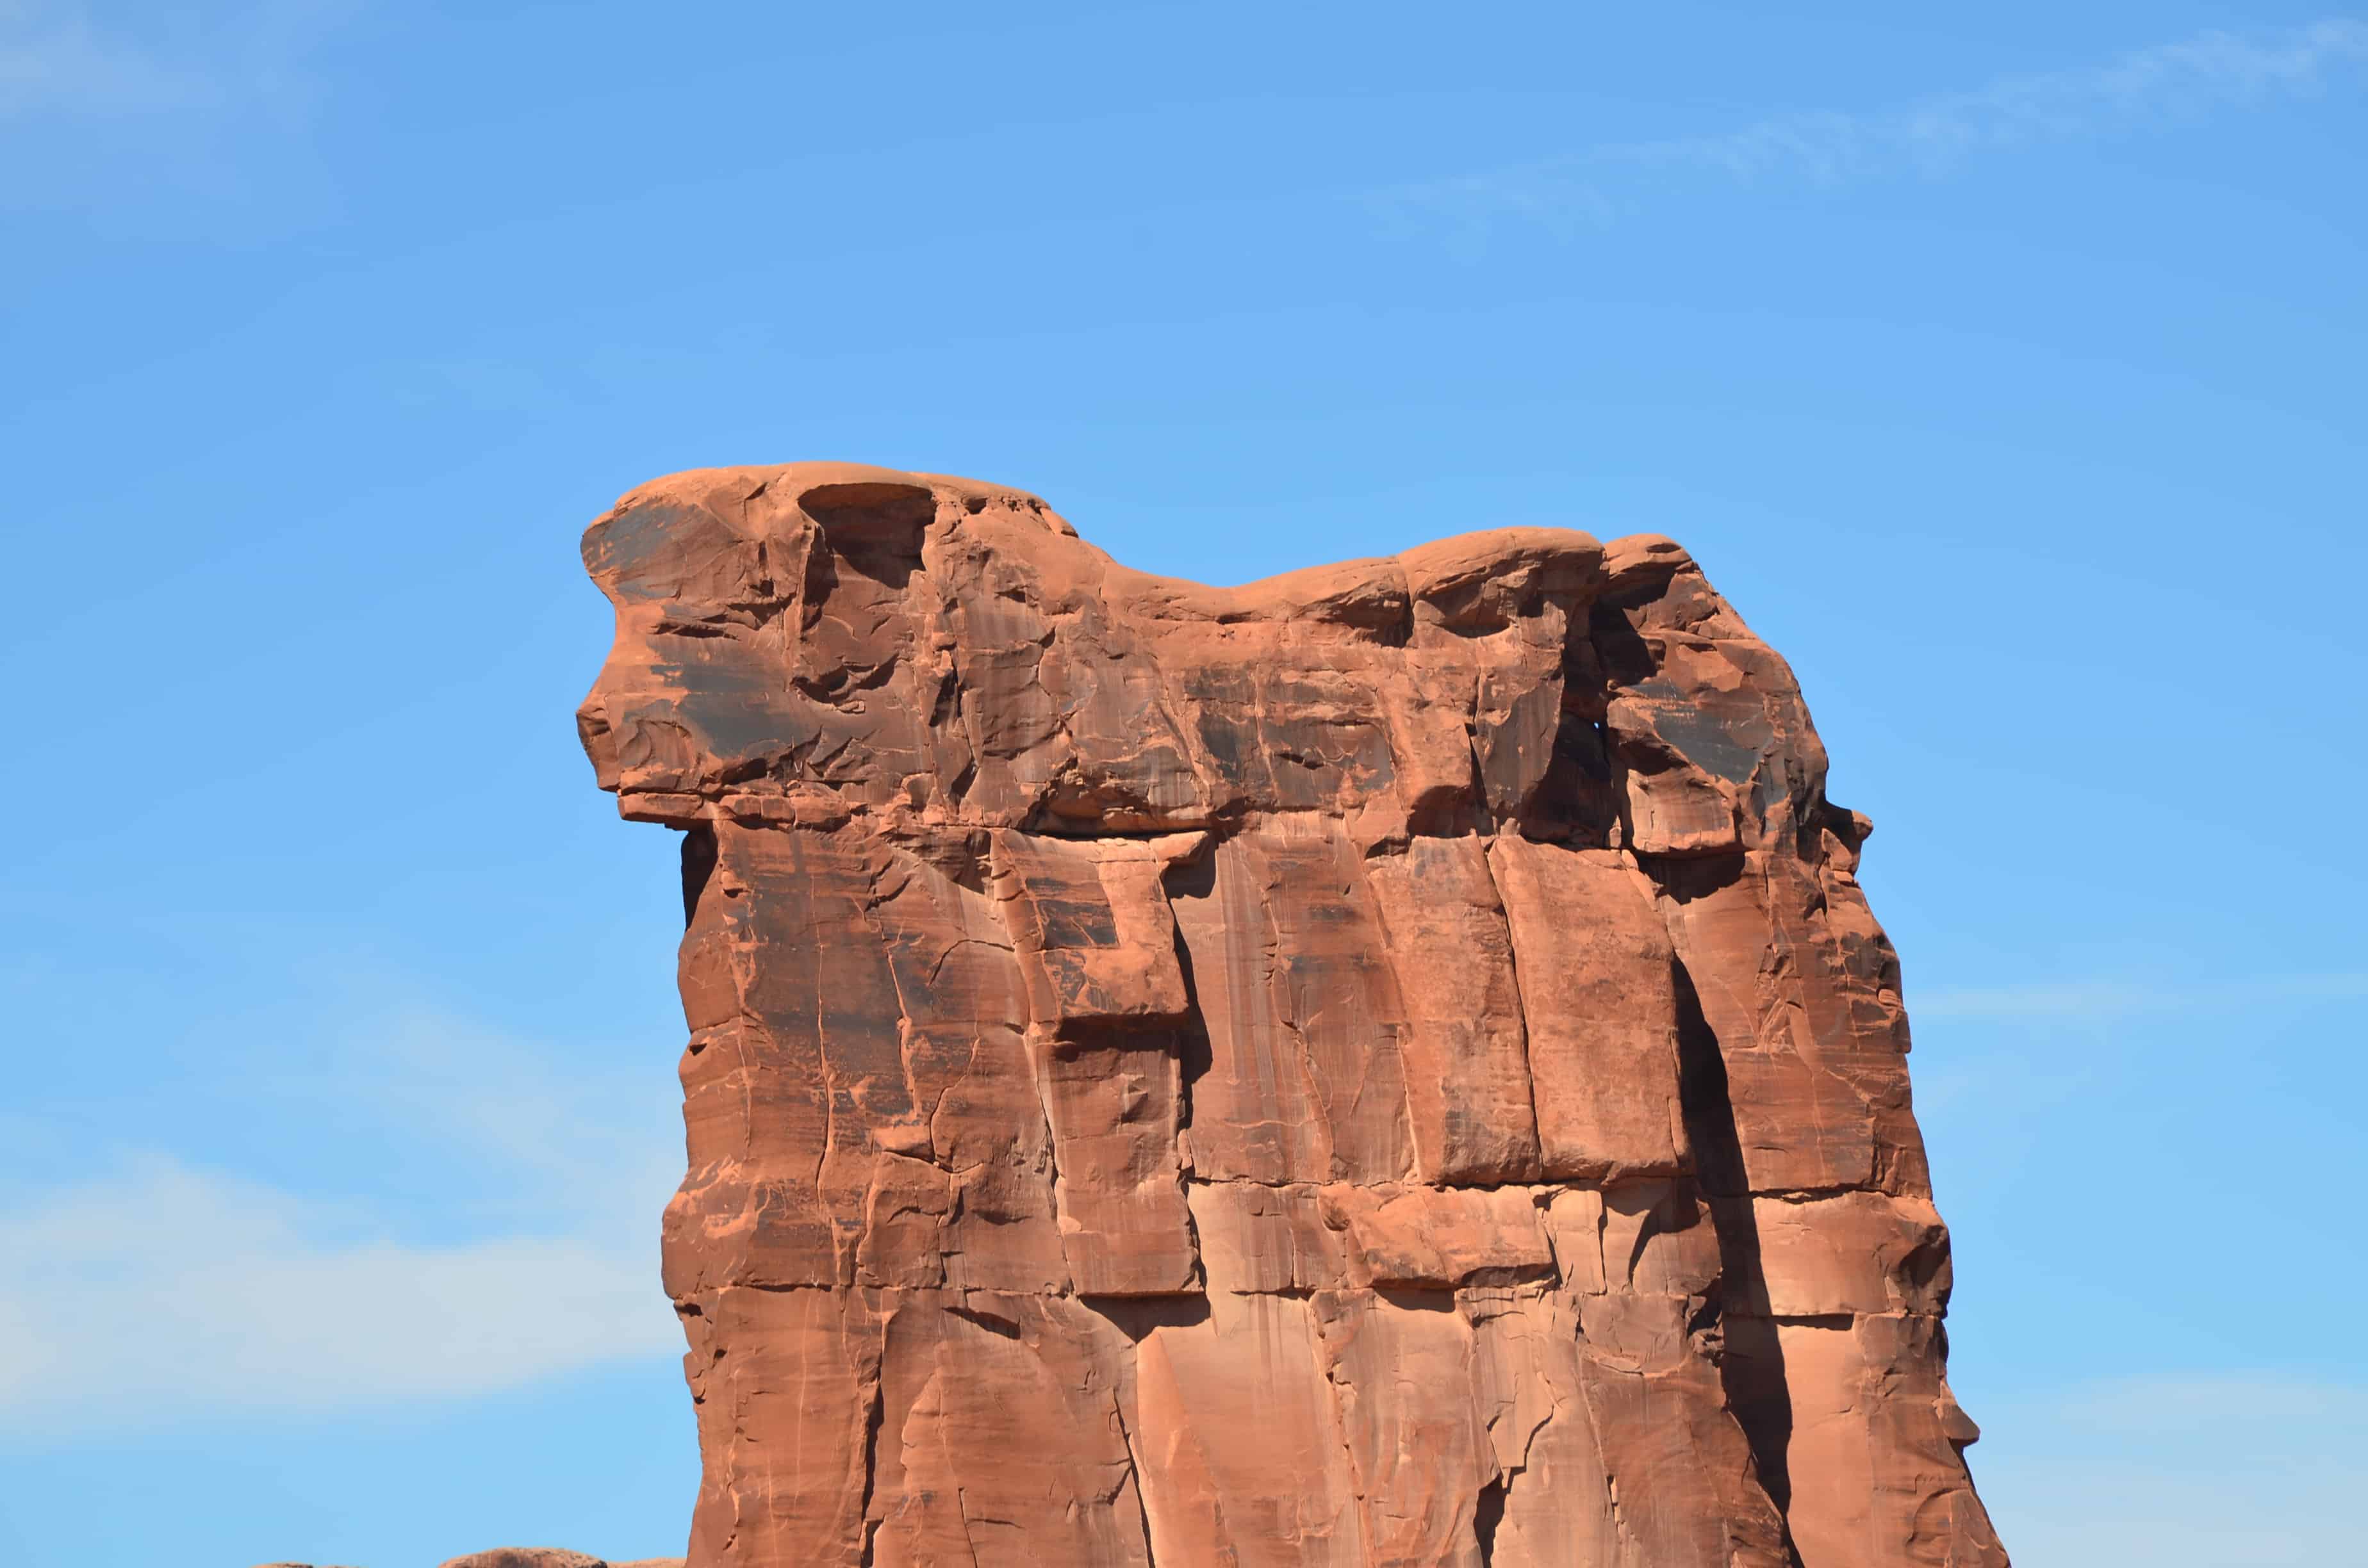 Sheep Rock at Courthouse Towers Viewpoint at Arches National Park, Utah